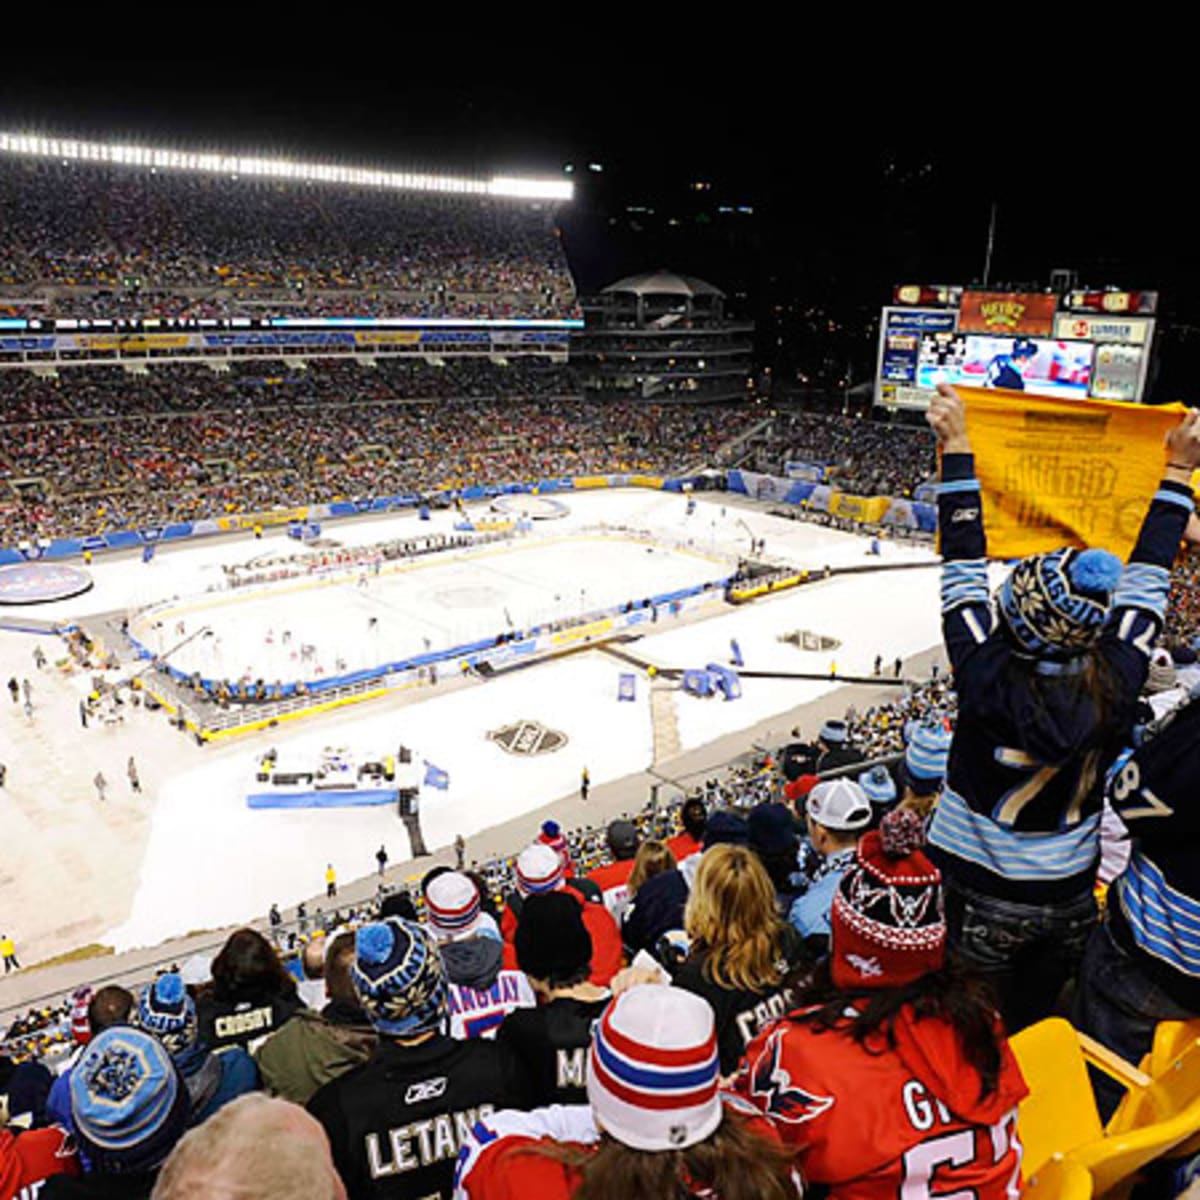 5 reasons for Kraken fans to be excited about Winter Classic in